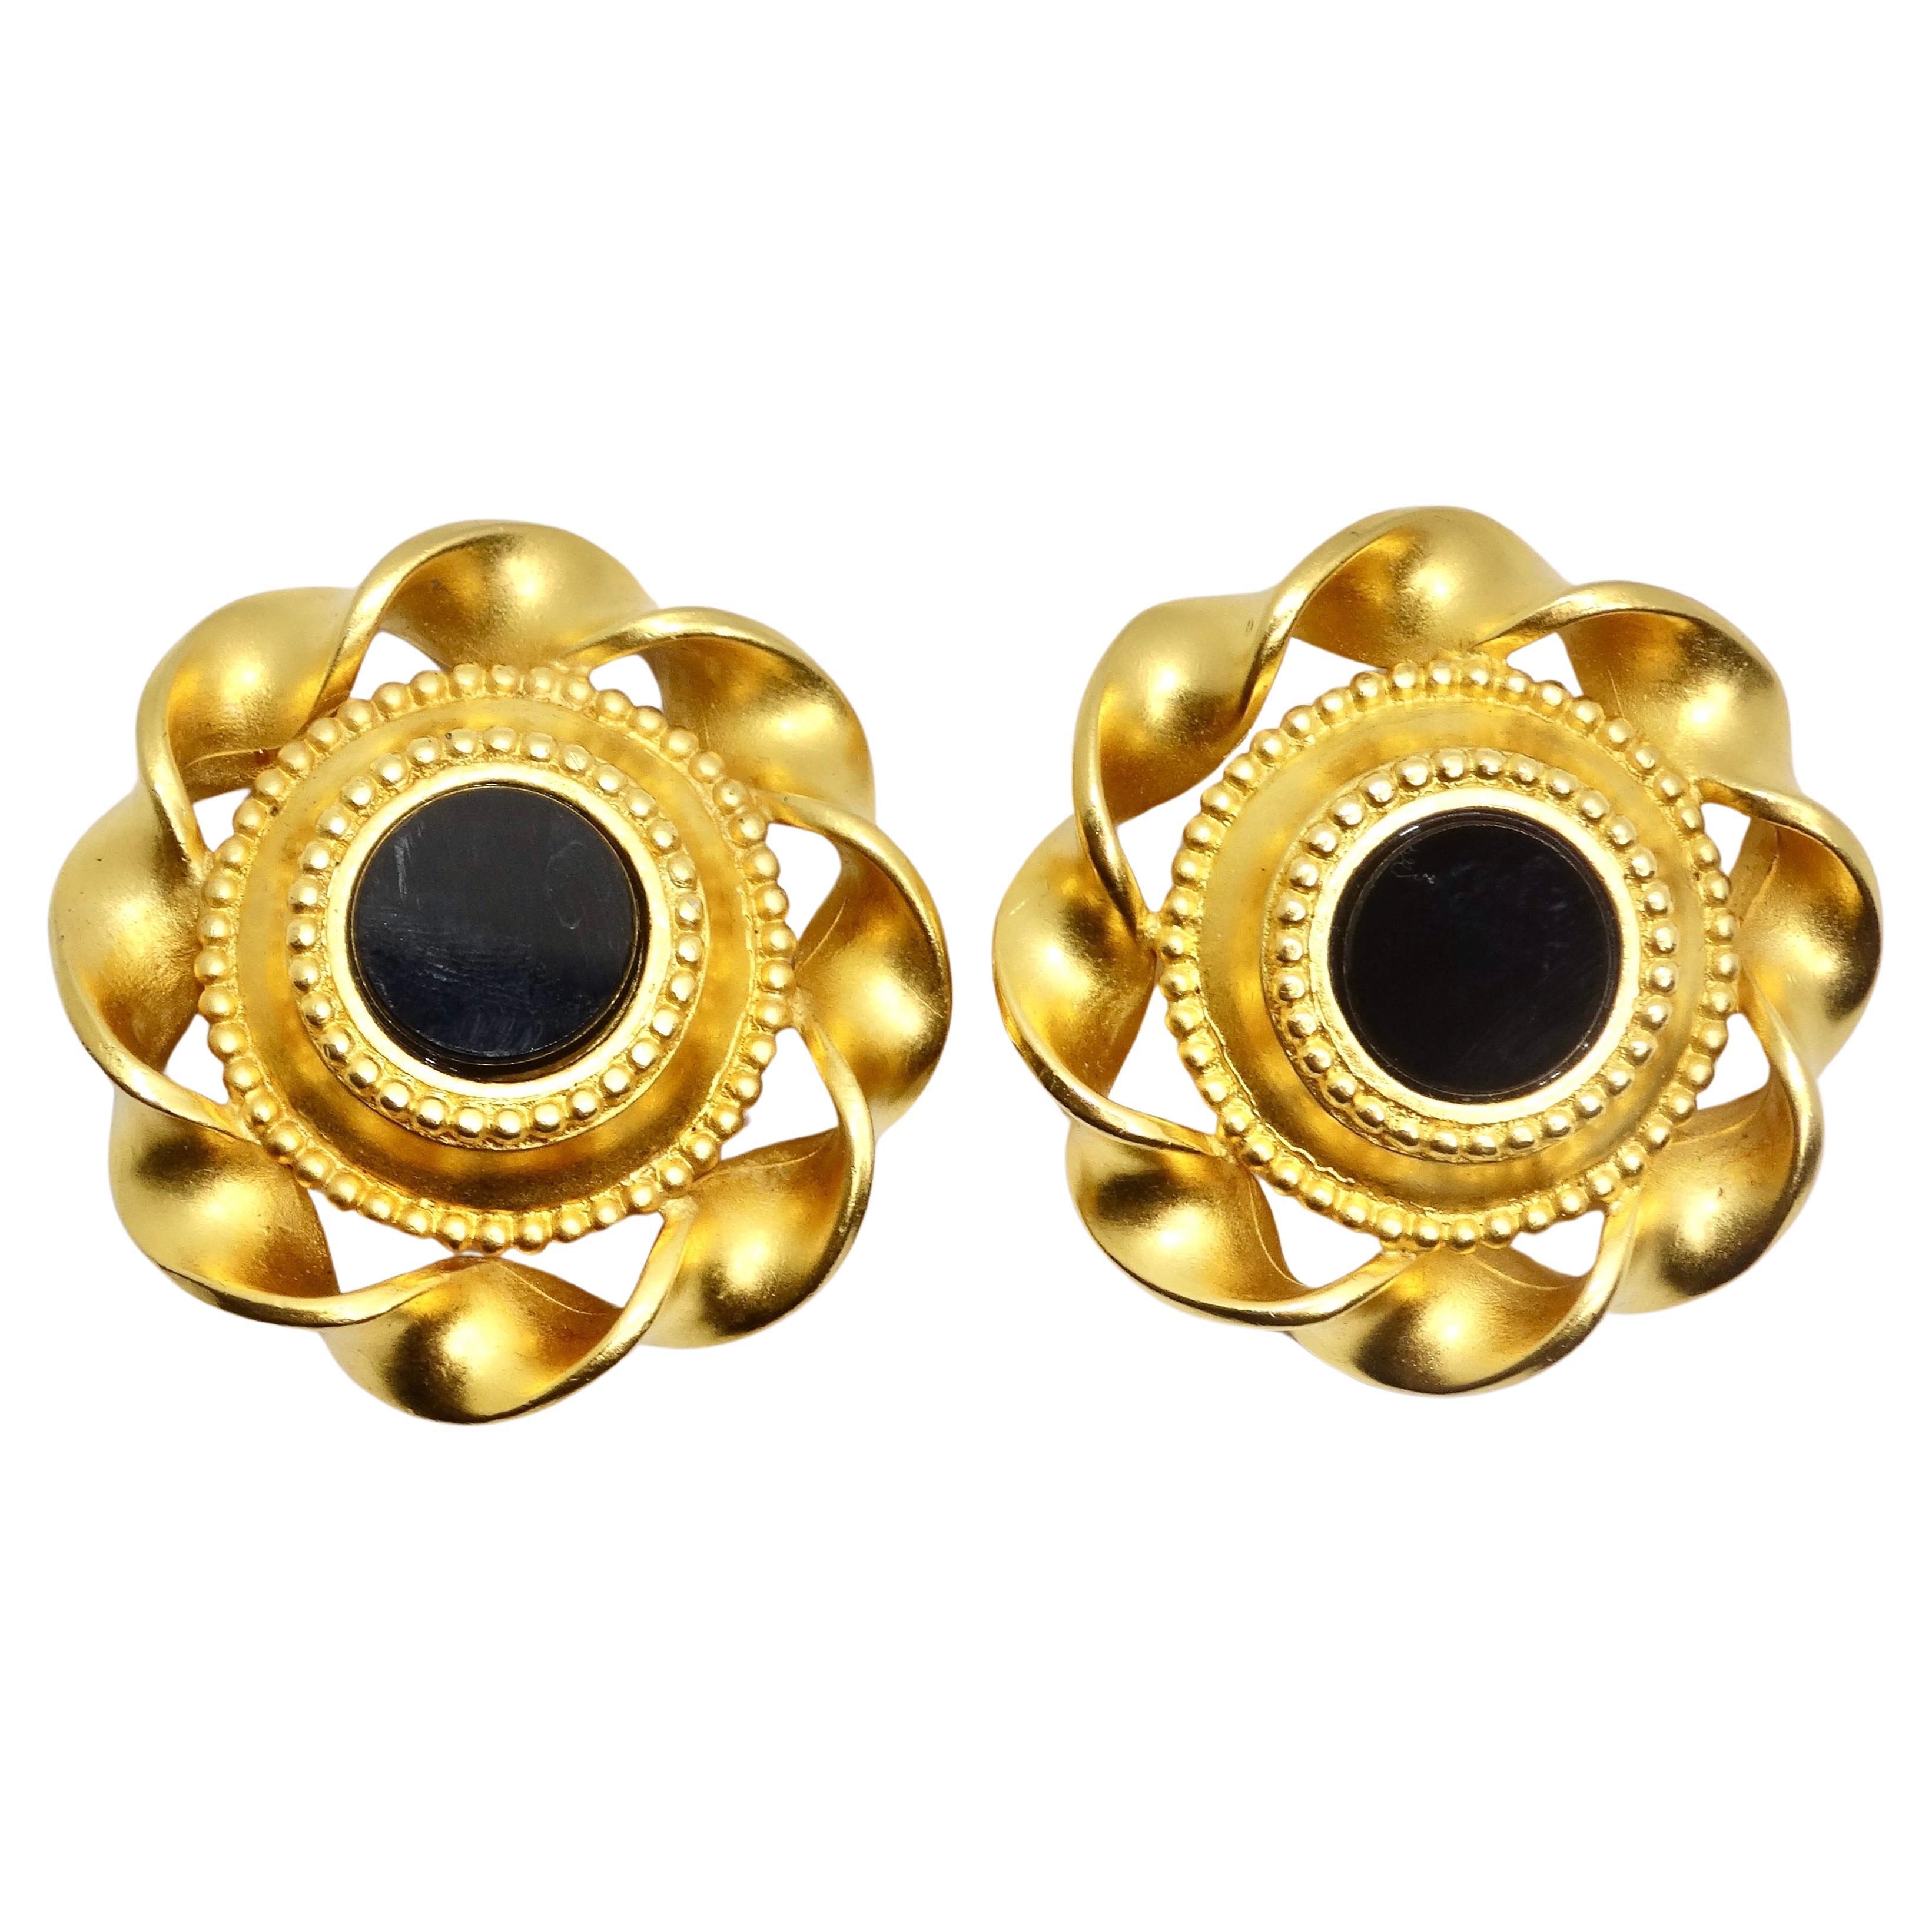 Karl Lagerfeld 1980s Gold Tone Black Stone Clip On Earrings For Sale